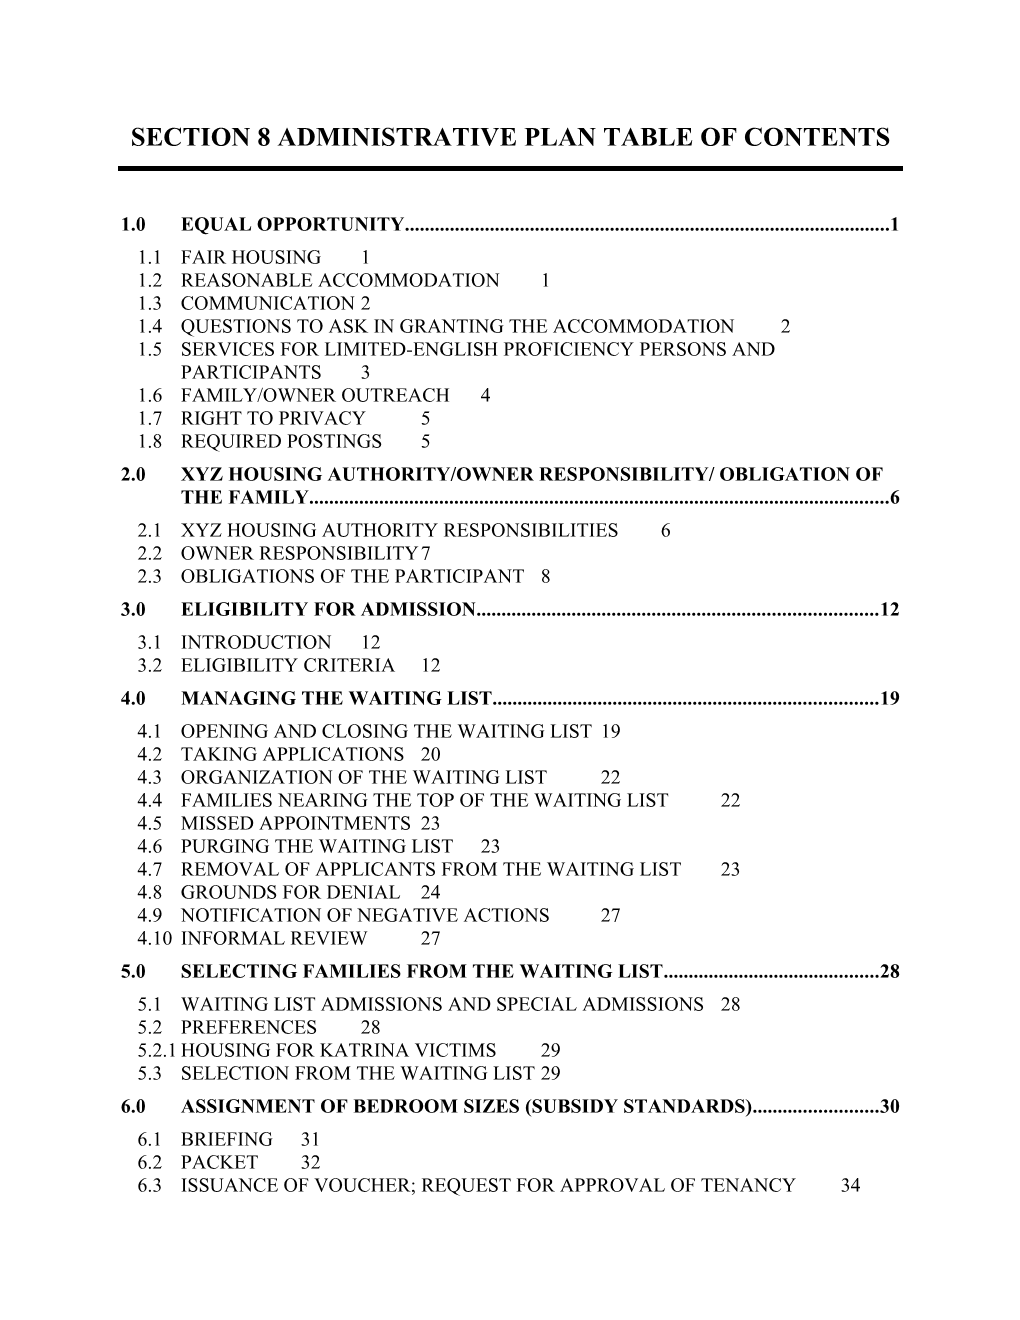 Section 8 Administrative Plan Table of Contents